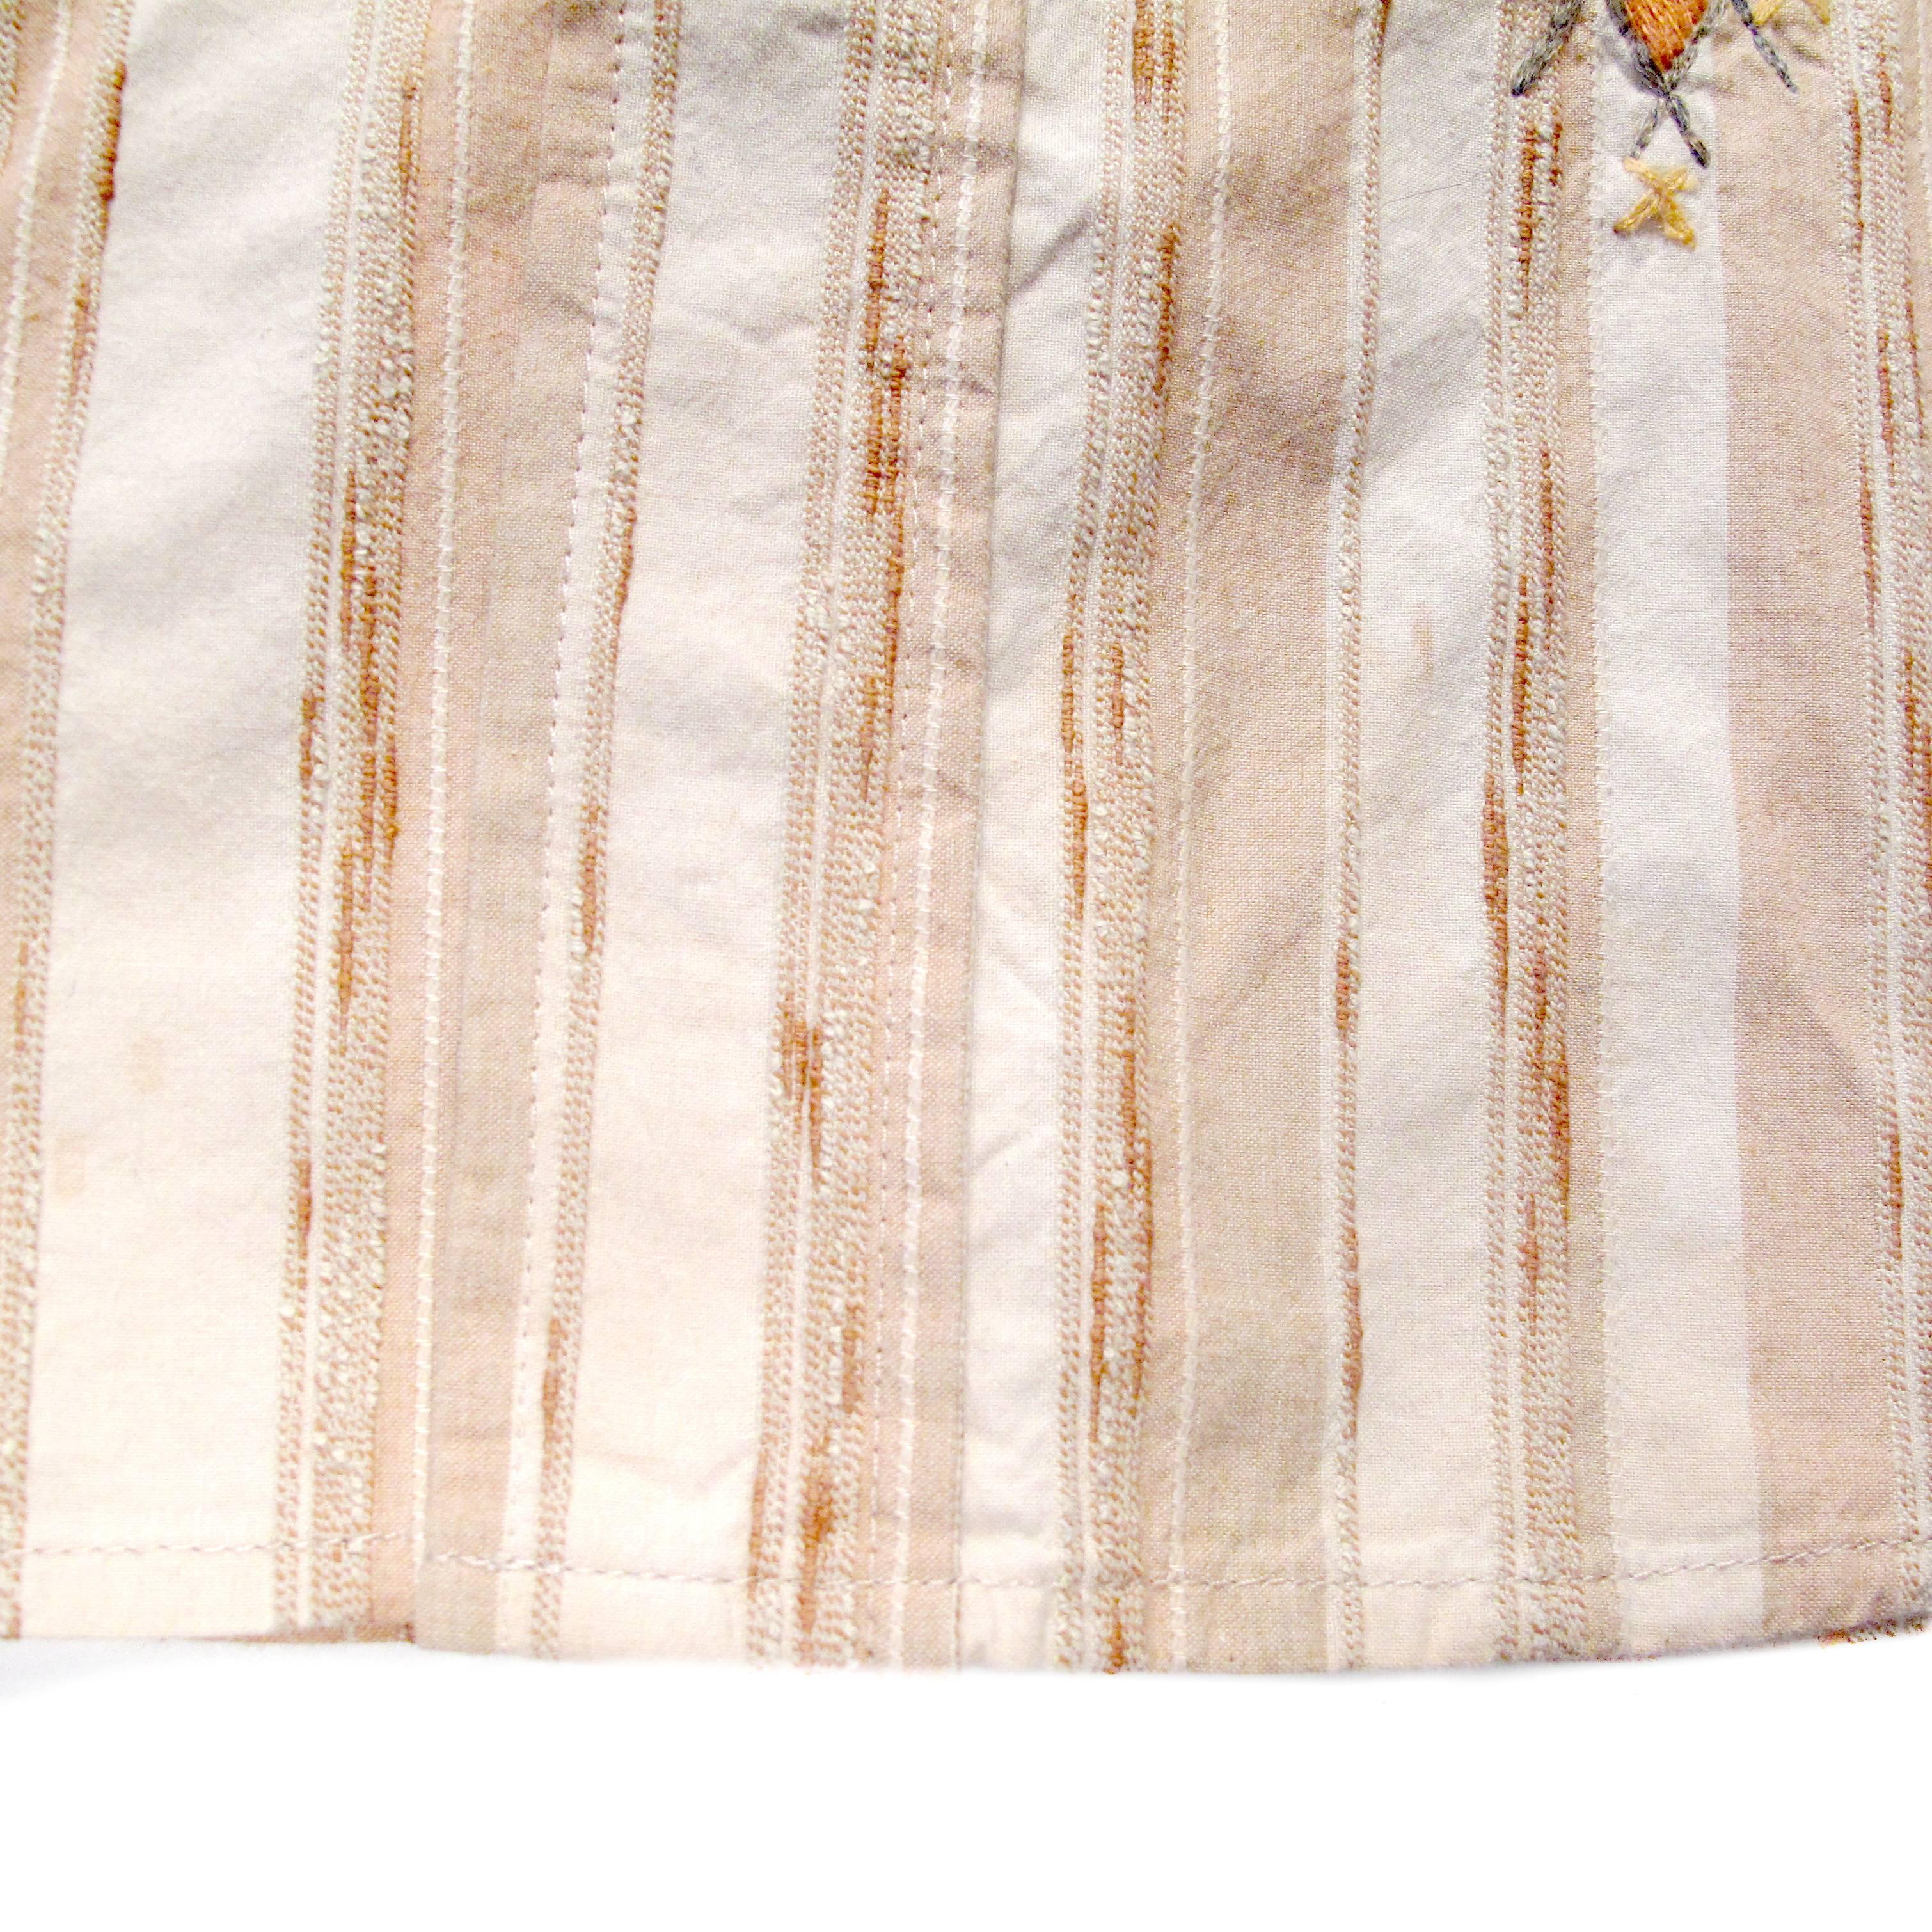 Dries Van Noten Shirt - Small - 48  - Embroidered Striped Button Up Tan 4